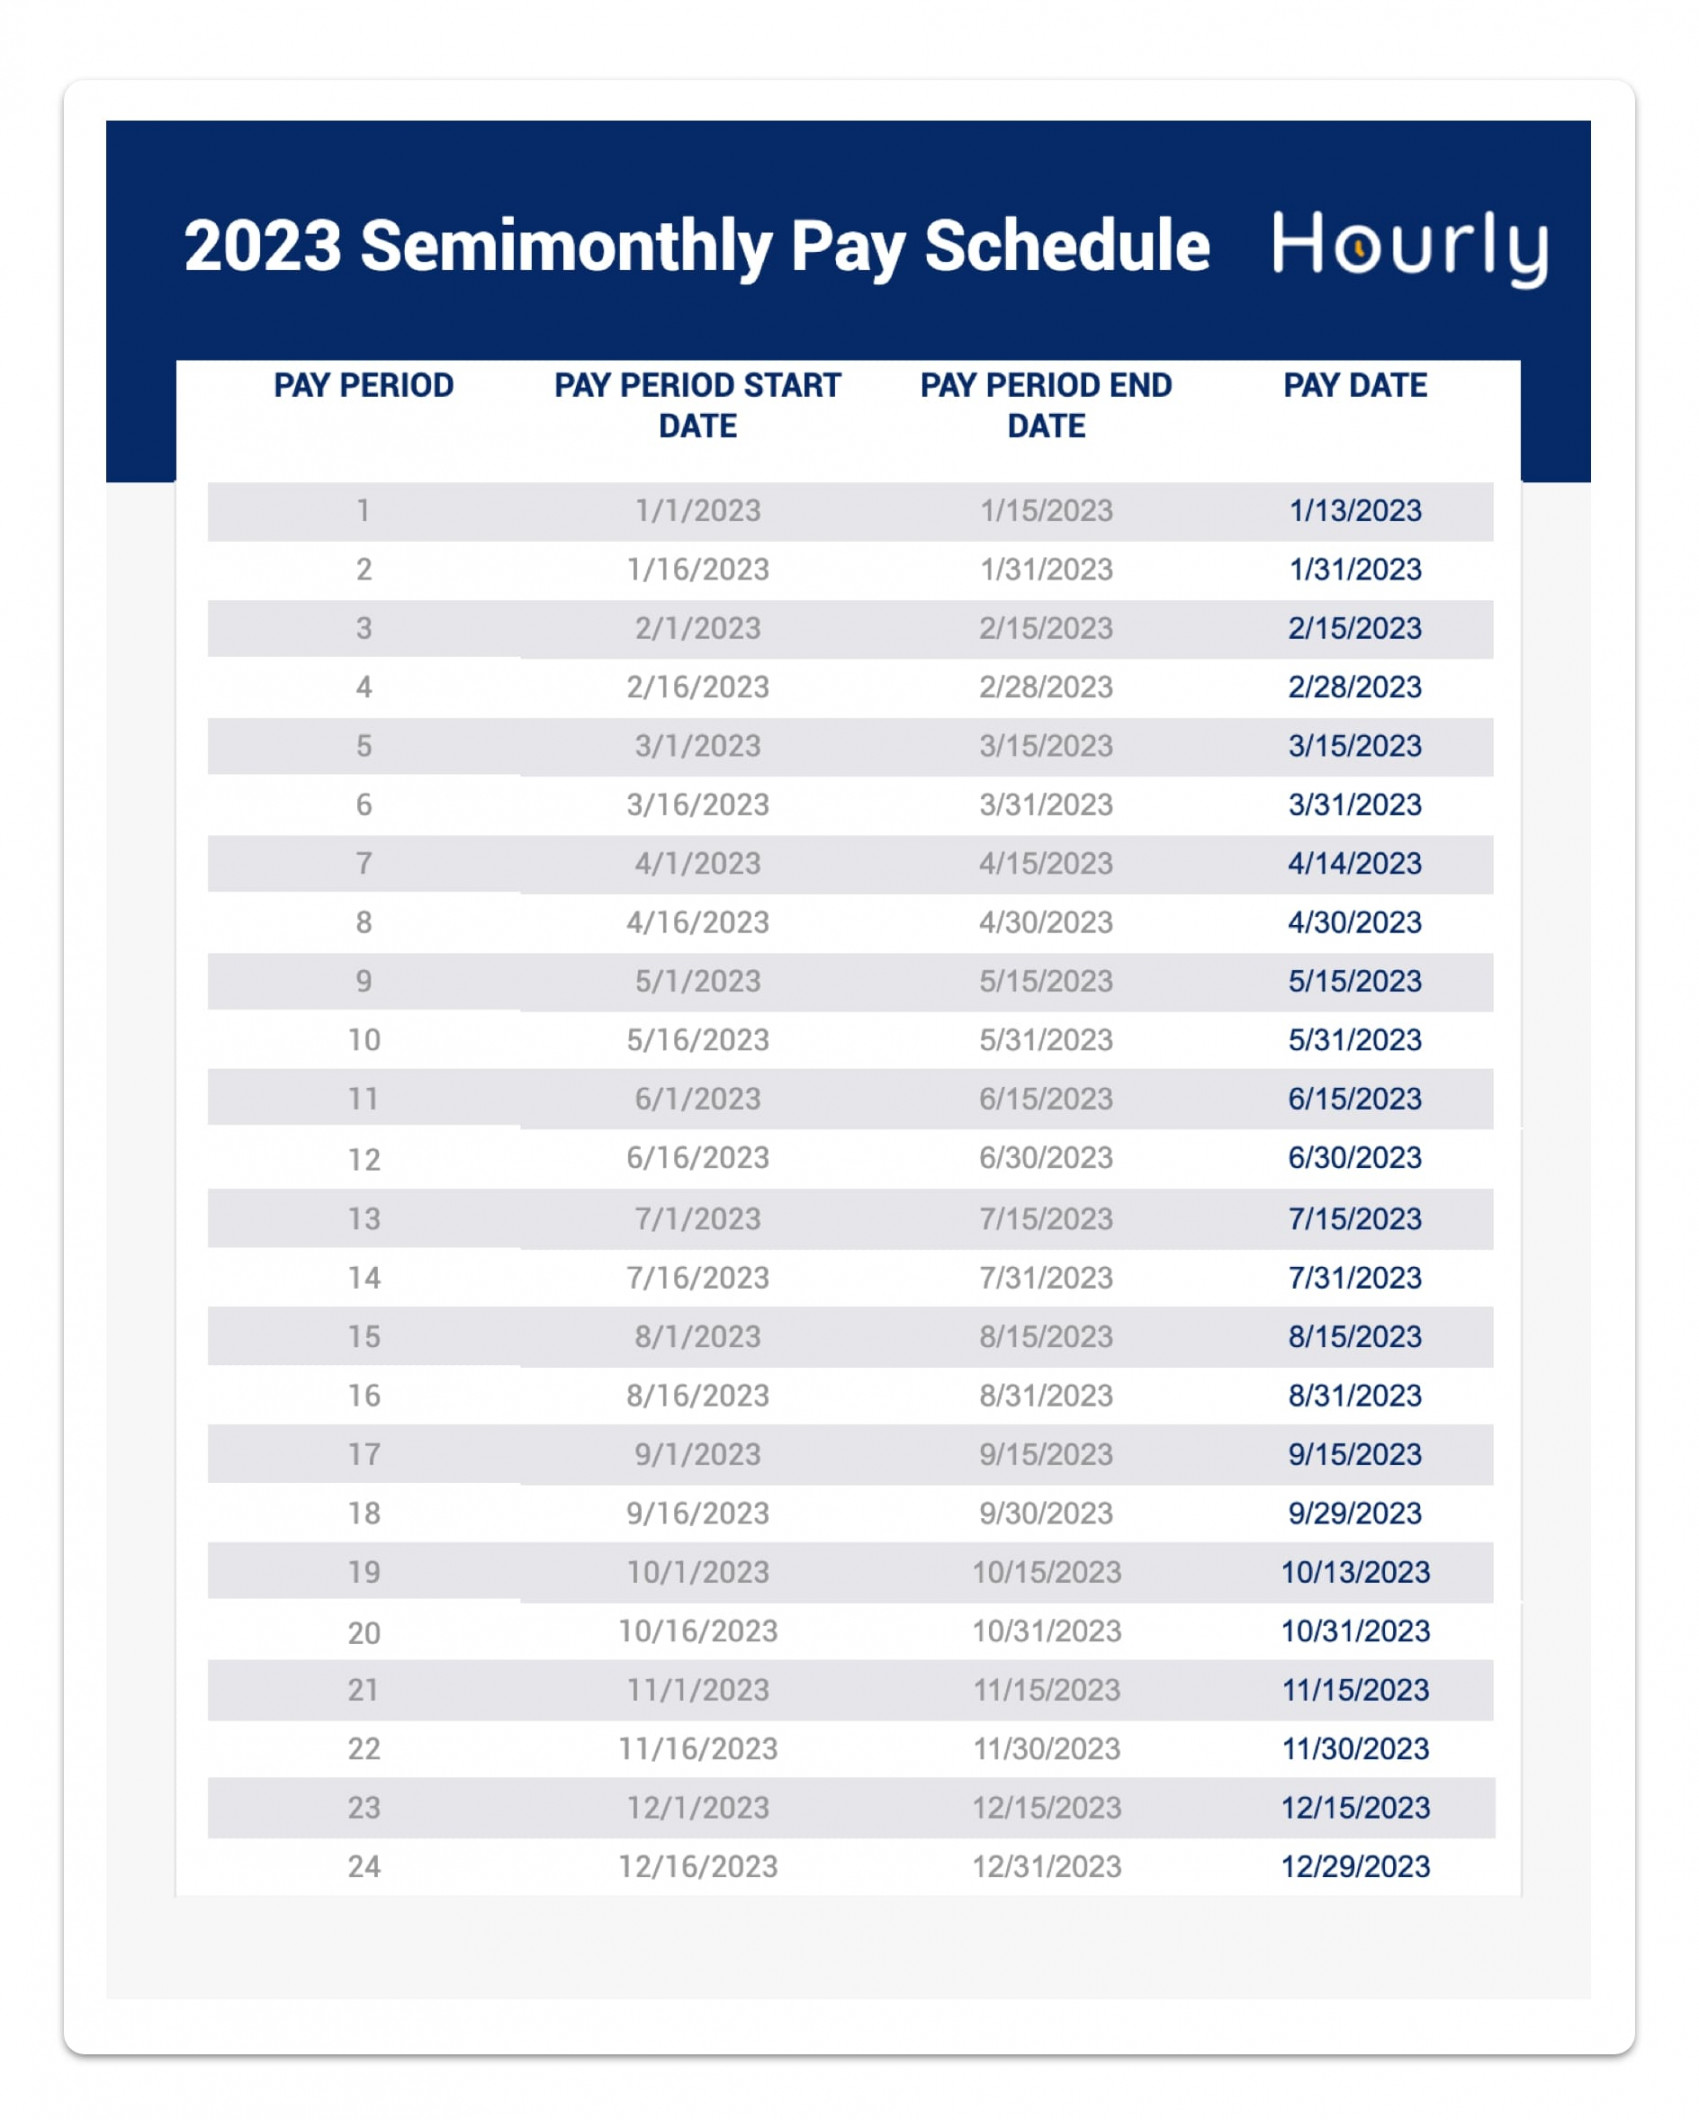 Your Guide to the  Semimonthly Pay Schedule - Hourly, Inc.